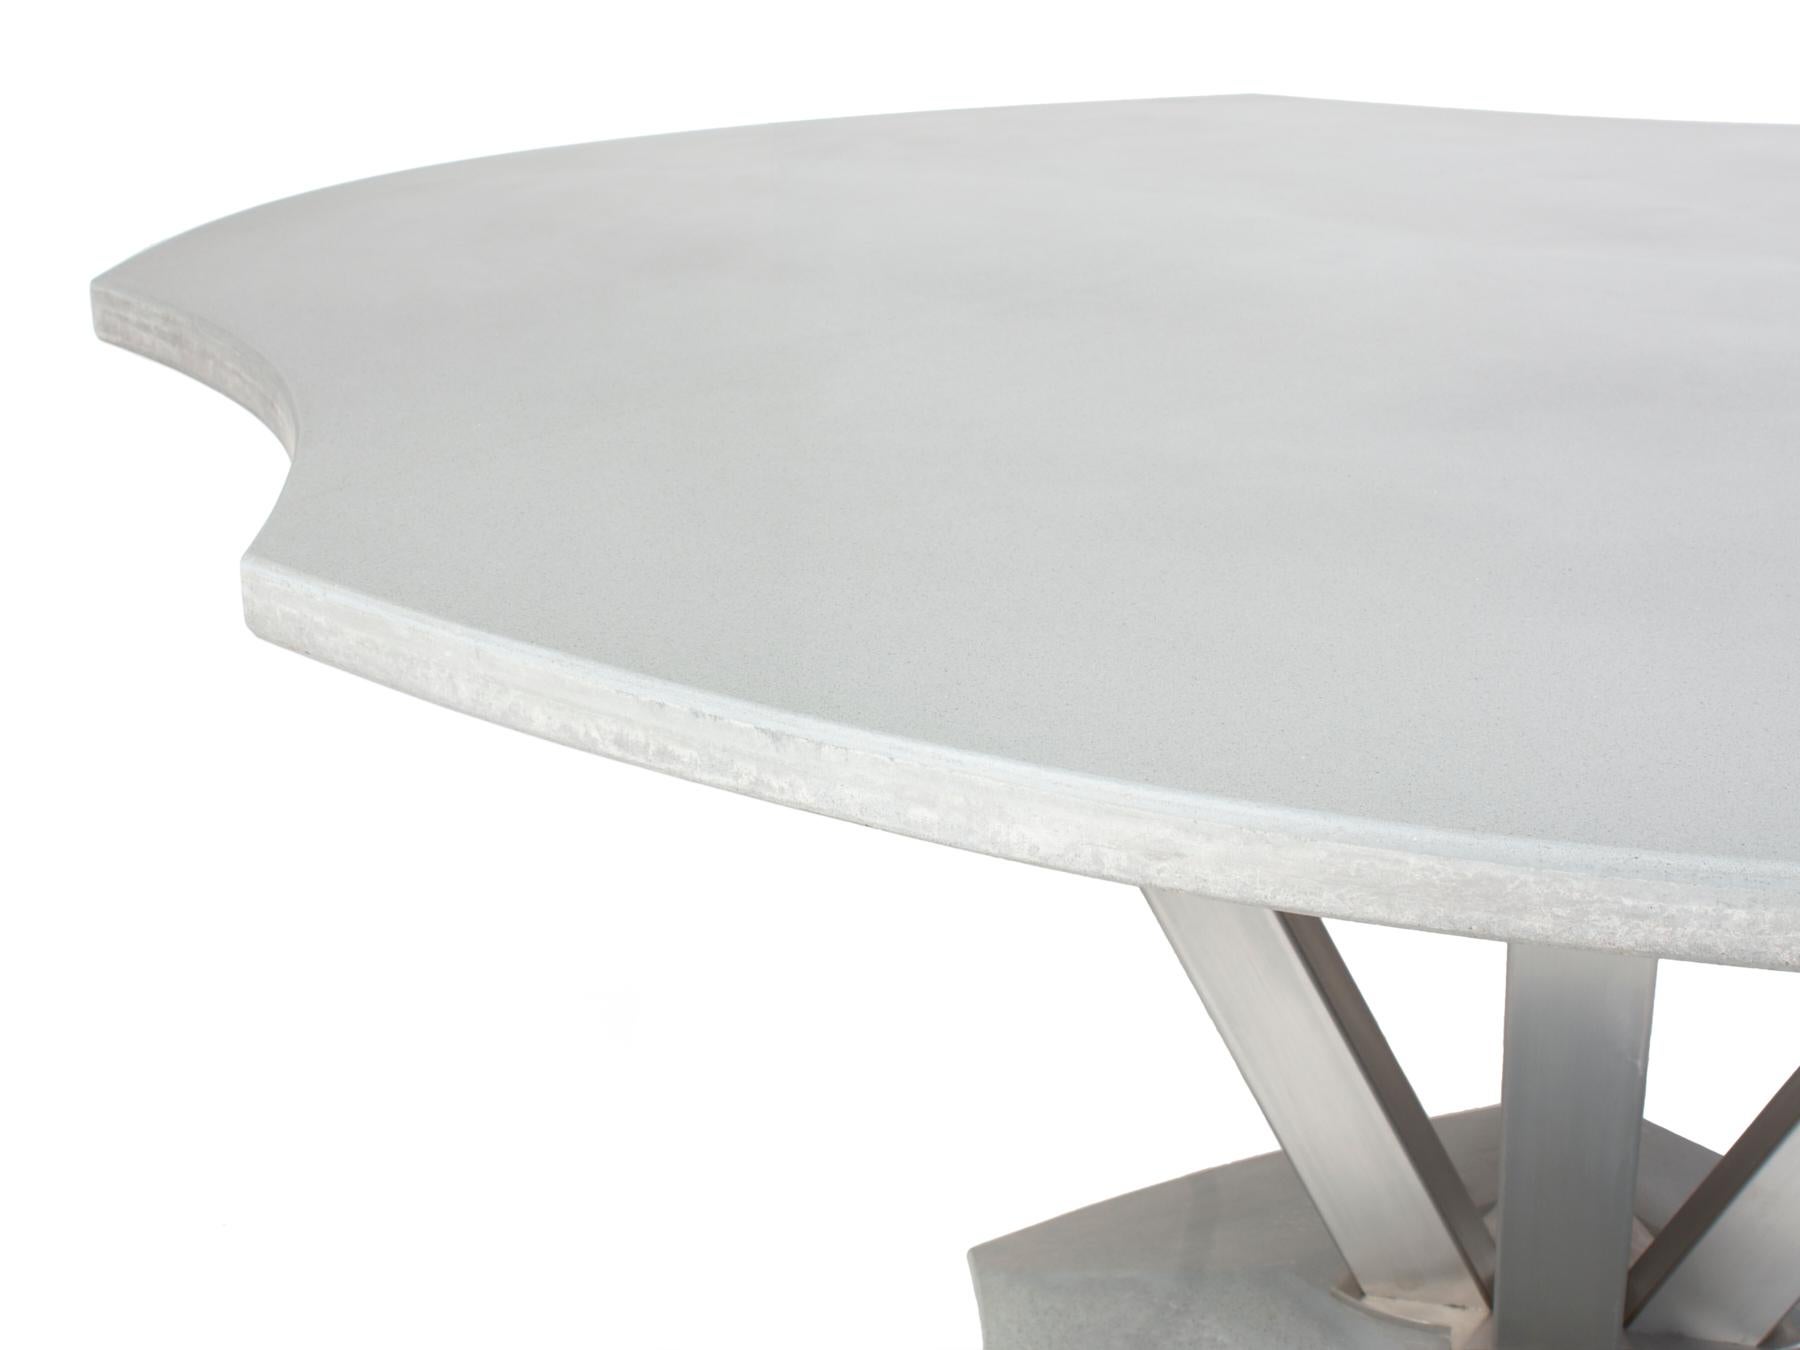 The Shore dining table was born of a desire to design a concrete outdoor table that was unlike anything I had seen. I wanted to find a way to introduce some freedom and spontaneity into the composition of the cast concrete top. I found a way to